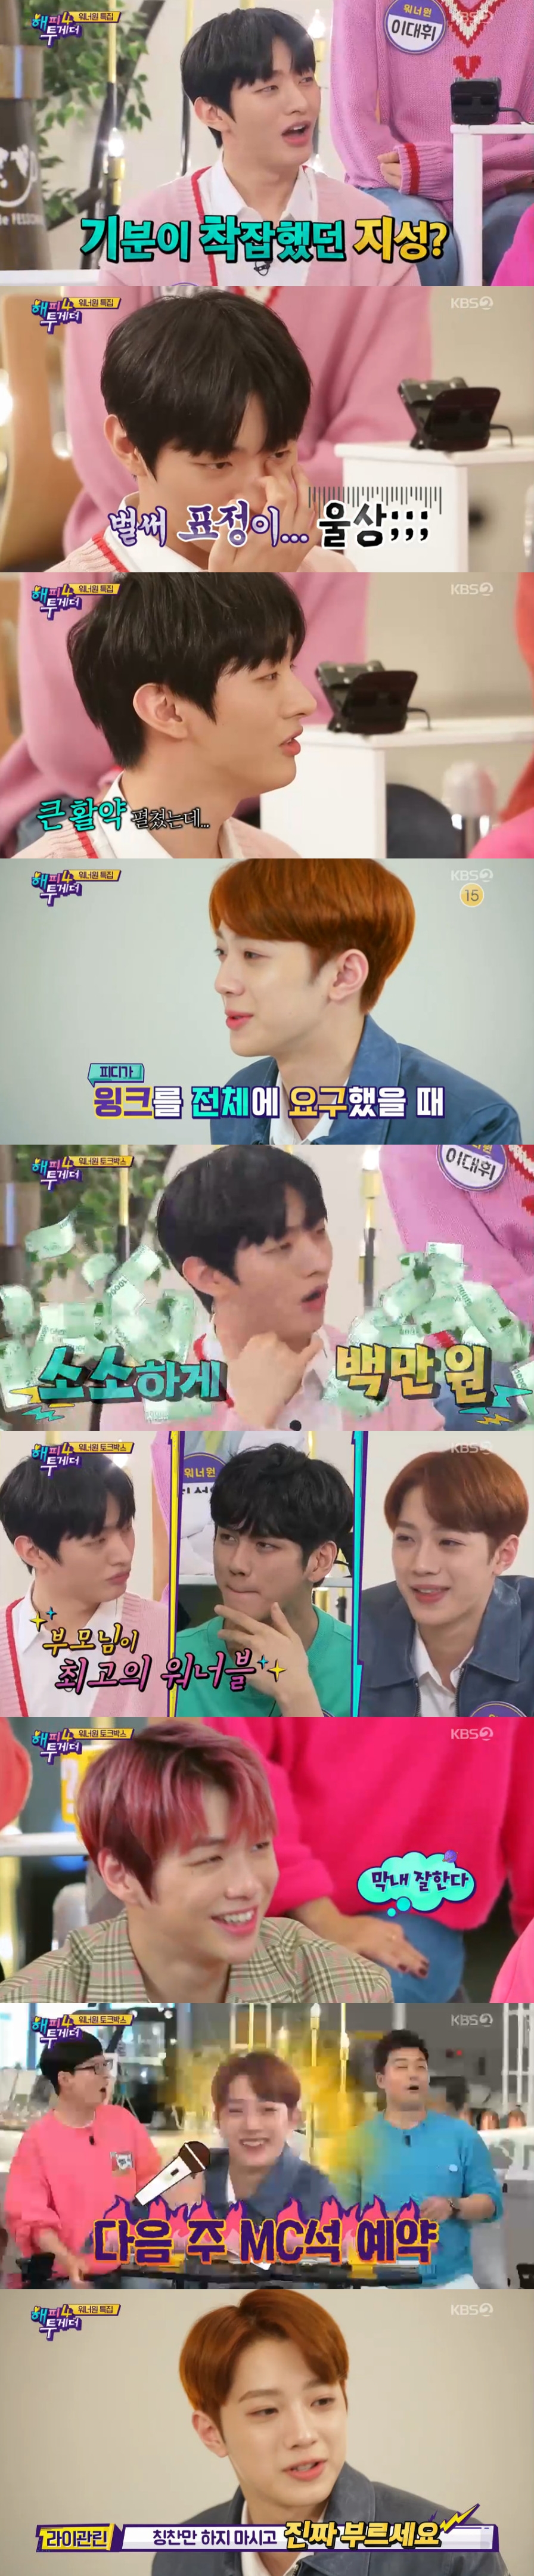 In the meantime, Daniel Hwang Min-hyun Park Jihoon among Wanna One members has been active in the entertainment industry.Among them, Hattoo announced the birth of a new entertainment sprout. Now, it is urgent to appear in the entertainment of Yoon Ji-sung Lai Kuan-lin.KBS 2TV Happy Together (hereinafter referred to as Hatu) and Wanna One are special relationships.After Wanna Ones debut, the first entertainment was Hattoo, and they learned how to adapt to entertainment in Hattoo.Since then, Hwang Min-hyun has made a special friendship by appearing in Hattoo several more times.As a gag woman Kim Ji-hye said, ProDeuce101 Season 2 is a program like Wanna One, and Hattoo became a program like the mother who raised Wanna One.Again, Haitu played a role like a mother with Lai Kuan-lin and Yoon Ji-sung.On the November 15 broadcast, Wanna One complete appeared for the first time.On this day, members of other entertainment shoots such as Lai Kuan-lin, Ha Sung-woon, and Yoon Ji-sung, who released artistic sensations on existing broadcasts such as Kang Daniel, Ong Sung Woo, Hwang Min-hyun and Park Jihoon, showed outstanding performances.First, Yoon Ji-sung said, Hwang Min-hyun often did well in Hattu and said, Why did not you call me?I thought I was a stepping stone, he said, expressing his sadness about not having to take him.He is also a person who gathered topics with special reaction and artistic sense at the time of Pro Deuce101 Season 2.Yoon Ji-sung emphasized that MCs I thought I was busy said, I am really free.Later on Talk Battle, Yoon Ji-sung released an episode that he had made a credit card for his mother after he was settled and fell into luxury shopping.Meanwhile, Yoon Ji-sung said, On the other hand, I was sorry that I wanted to enjoy and enjoy as a person before I was a mother.I felt that I did not live because I did not know. I am sorry that I can do it now. Special MC Han Eun-jung, who watched witty gestures and desperation, chose Yoon Ji-sung as a talk MVP, and Yoon Ji-sung was thrilled.Above all, the youngest member of the day was Lai Kuan-lin.Lai Kuan-lin reveals that her father is so into SNS that he often uploads his photos, while I go to a gym like Jang Dong-gun.I have been to the premiere of Changwol because you have been looking at me beautifully. I was surprised to show off my reverse network with actor Jang Dong-gun.Lai Kuan-lin, meanwhile, showed the mischievousness of confusing god Joon Park and comedian Joon Park, and did not ask, but he burst in and laughed whenever other members talked.Especially, Lai Kuan-lins excellent Korean language skills attracted much attention.Lai Kuan-lin, who had a bad Korean language a year ago, did not adapt properly to Korean entertainment, but in a year he was a different person.Lai Kuan-lin said, I studied a lot. I think I can sit at MC next week.Daniel was also pleased to see the youngest Lai Kuan-lin.In addition, Lai Kuan-lin said, I have recently had a lot of foreign idols, but I was sorry not to hattoo. When I finished the broadcast, I praised myself for the praise of pouring out.I will study Korean hard and show a good picture. bak-beauty